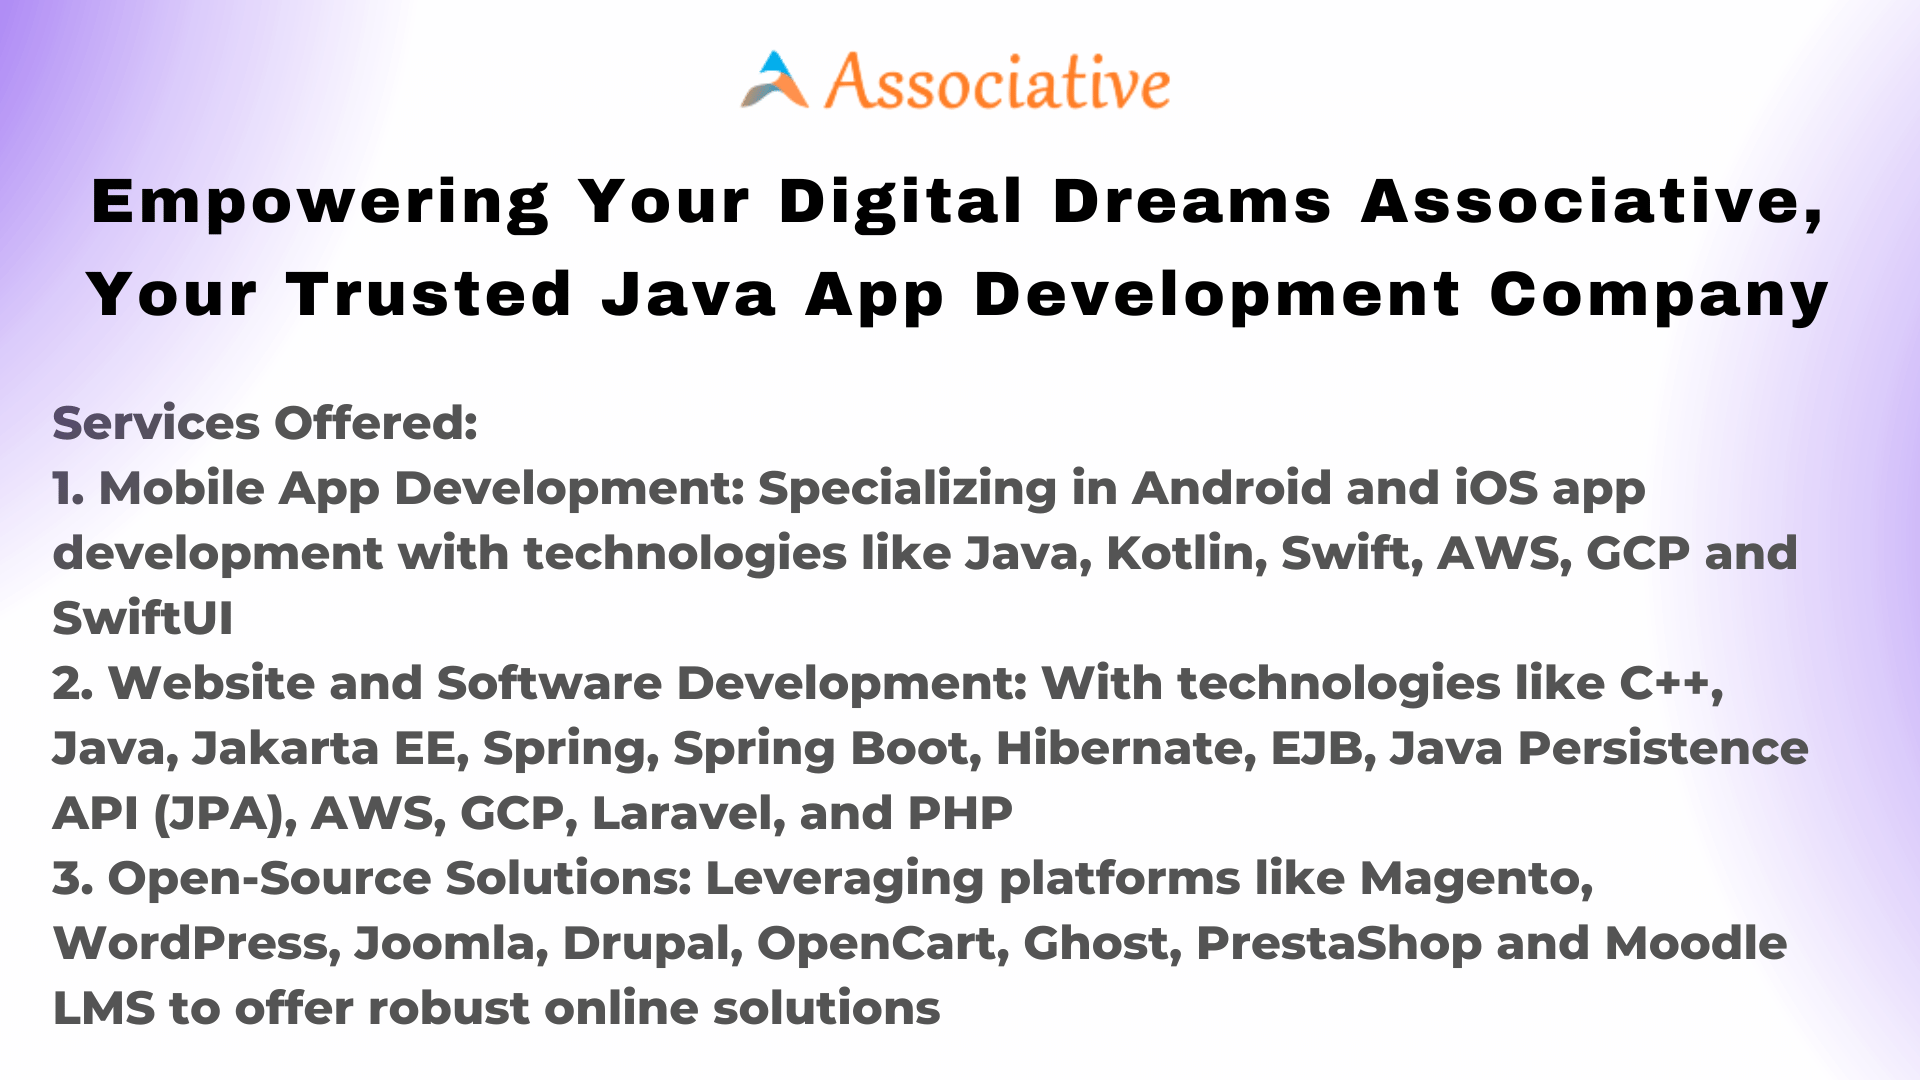 Empowering Your Digital Dreams Associative, Your Trusted Java App Development Company